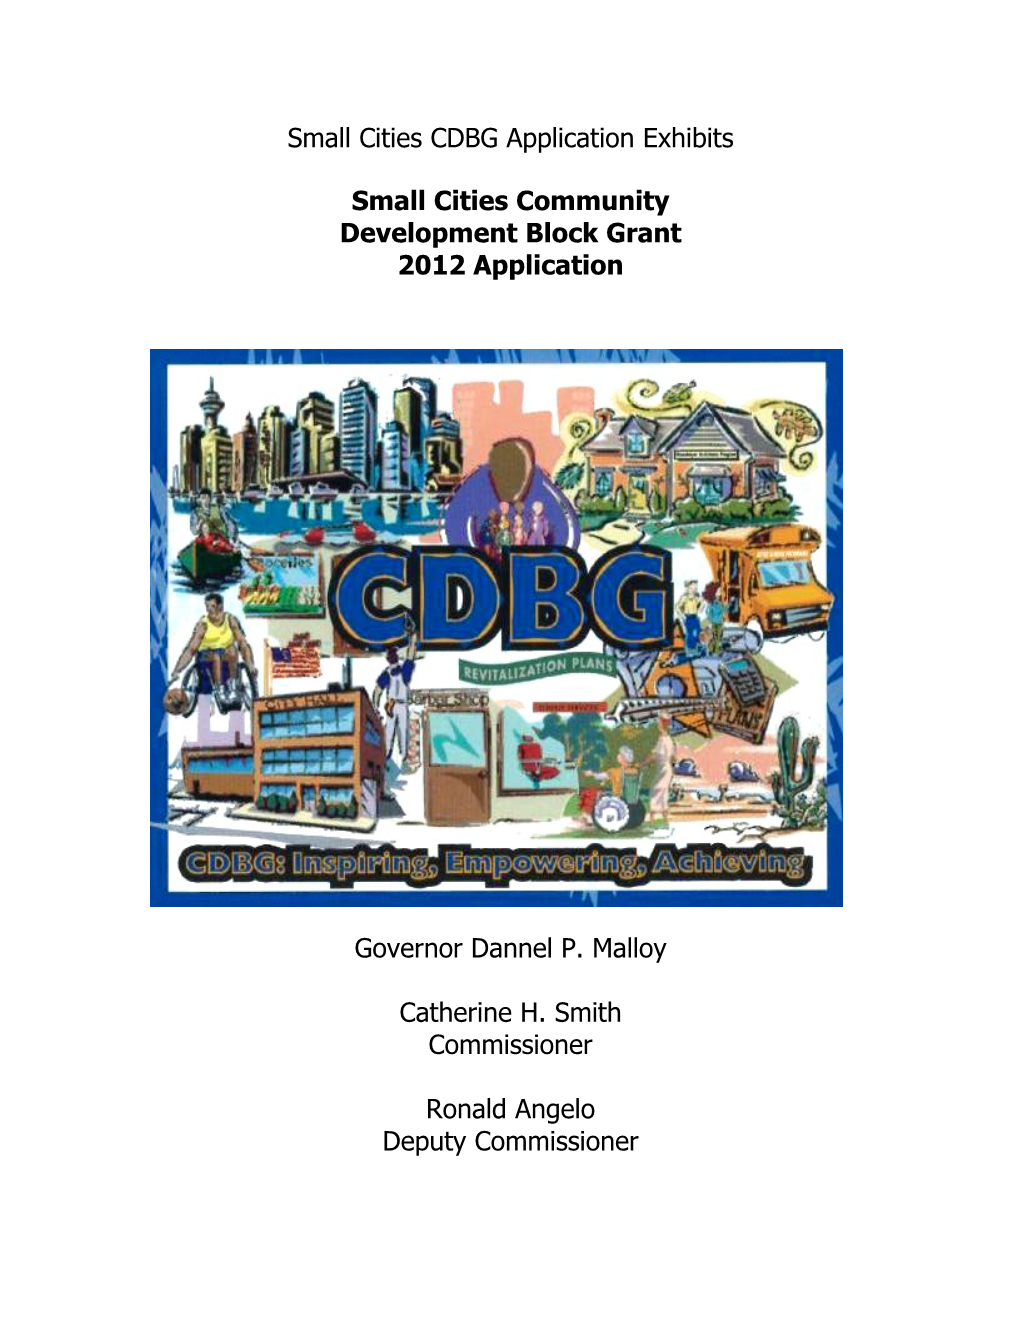 Small Cities CDBG Application Exhibits s1